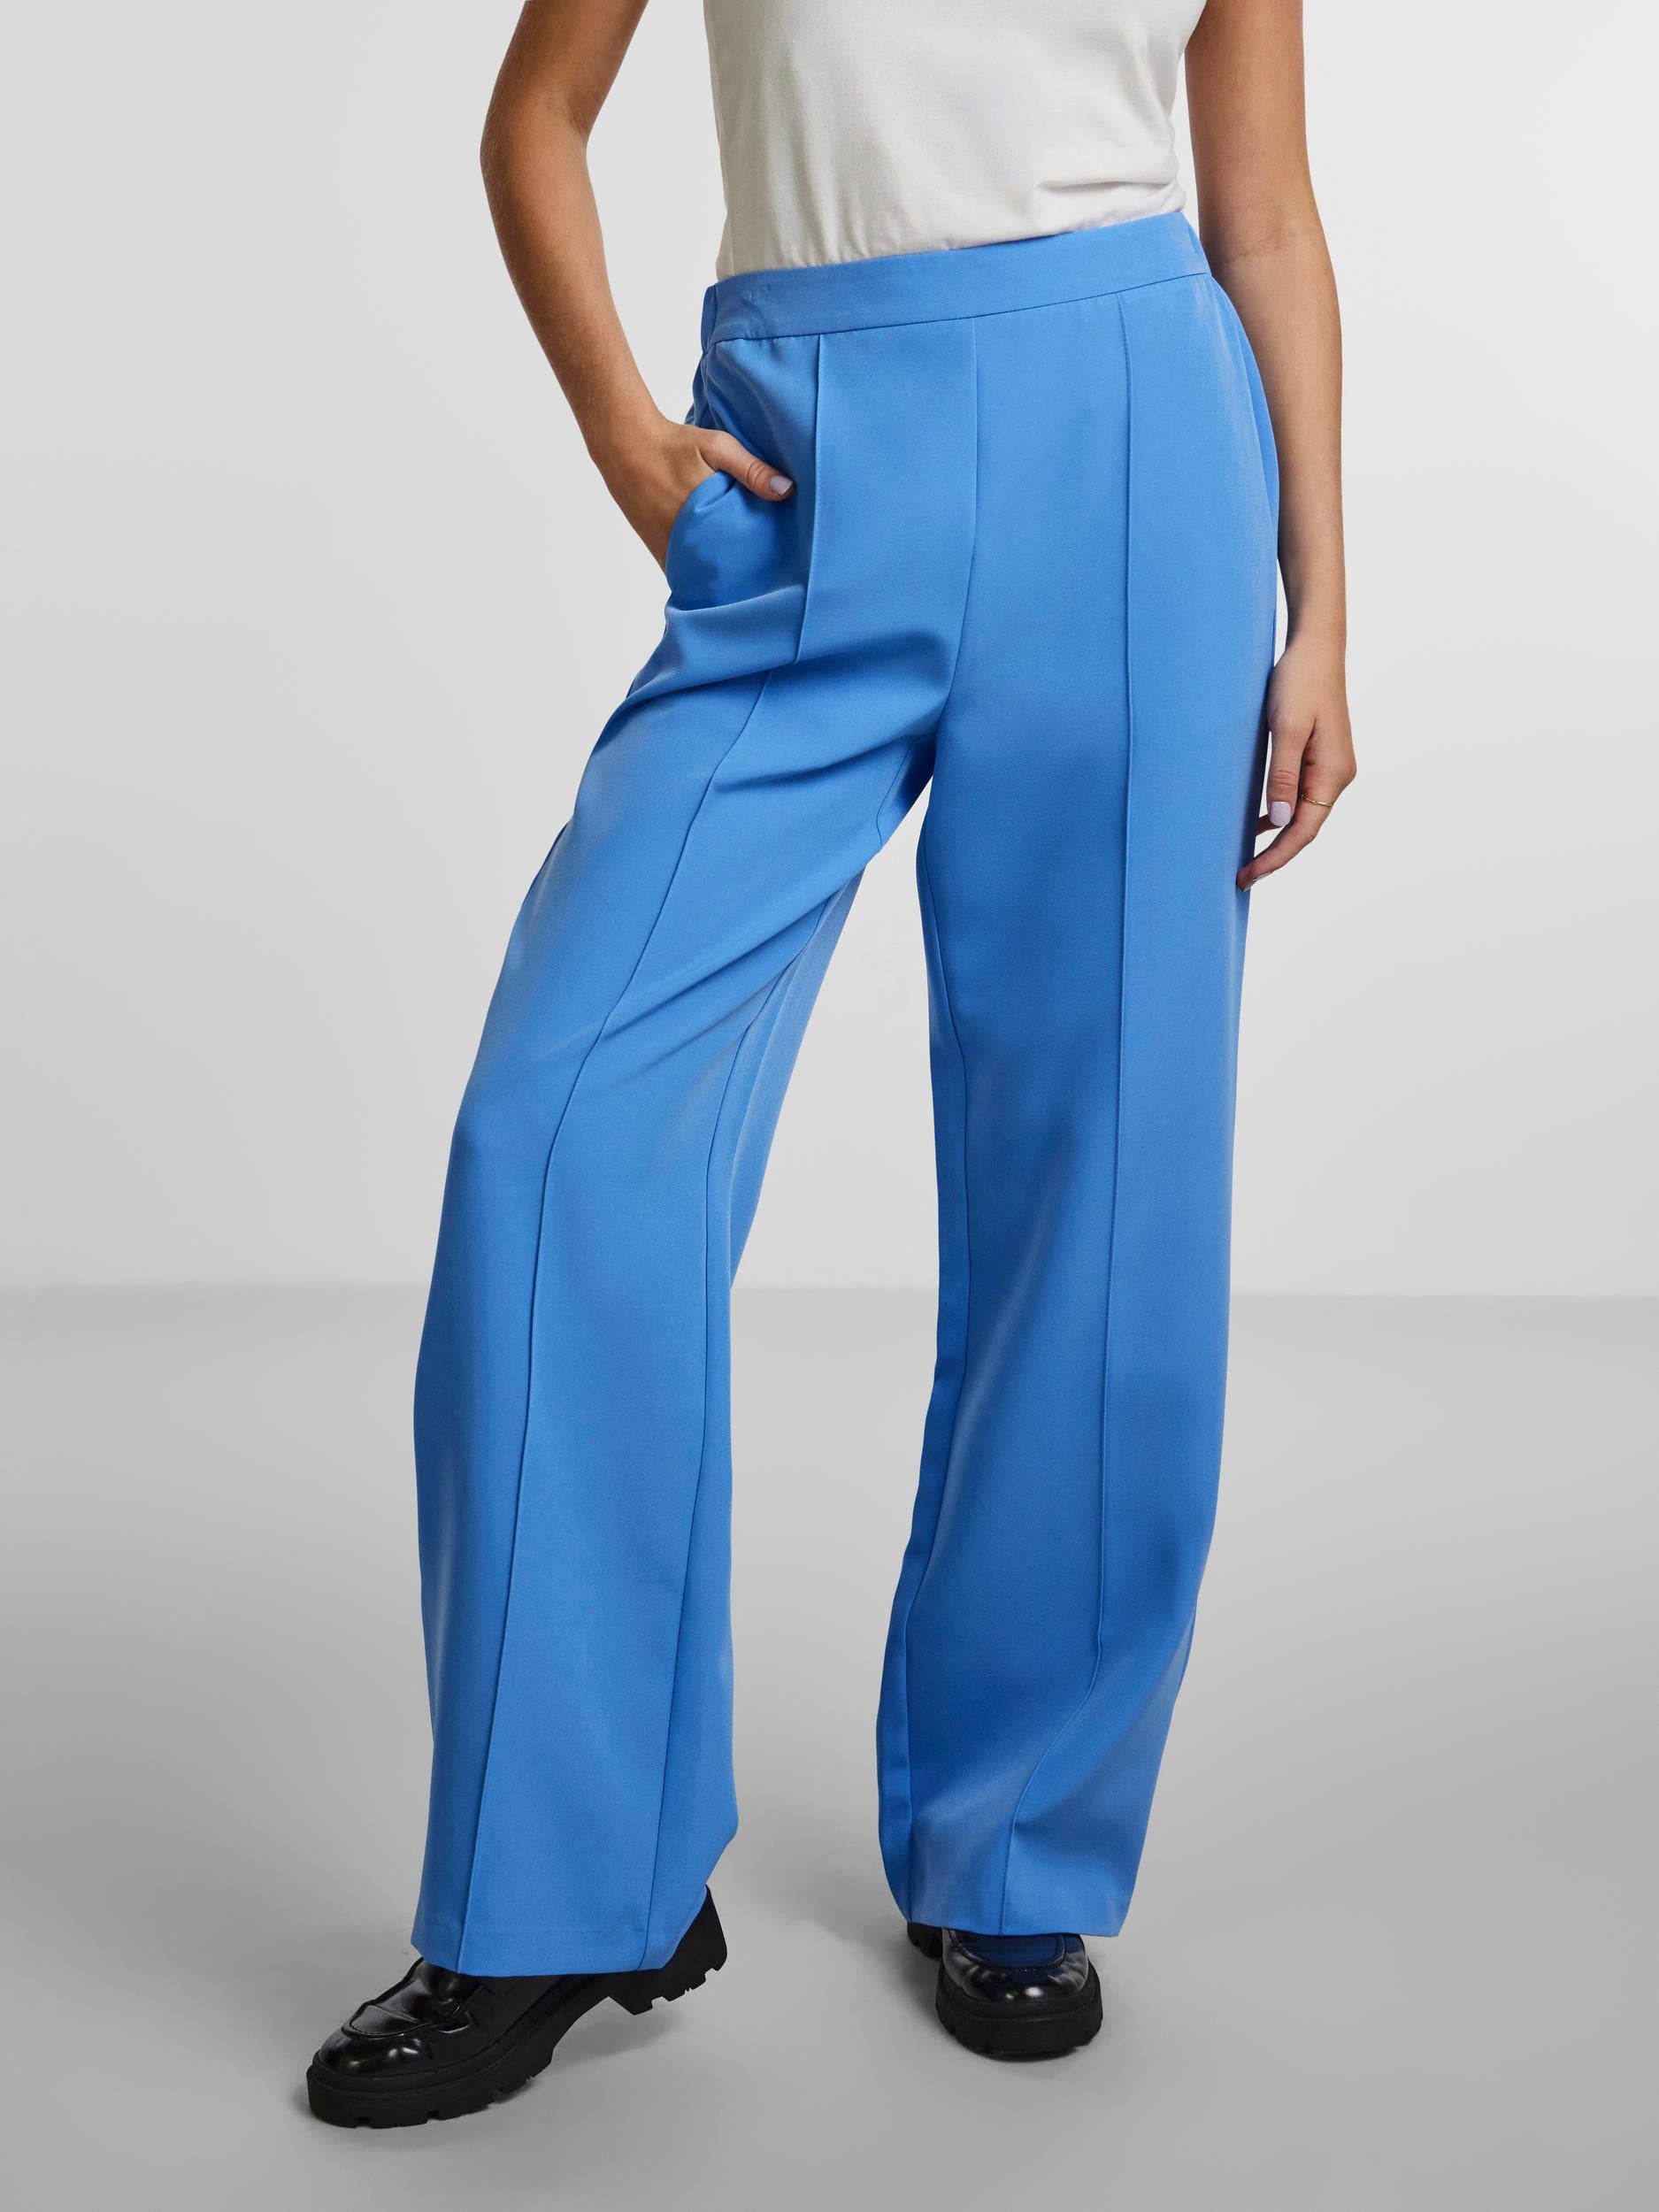 Pieces Bossy wide pants - marina